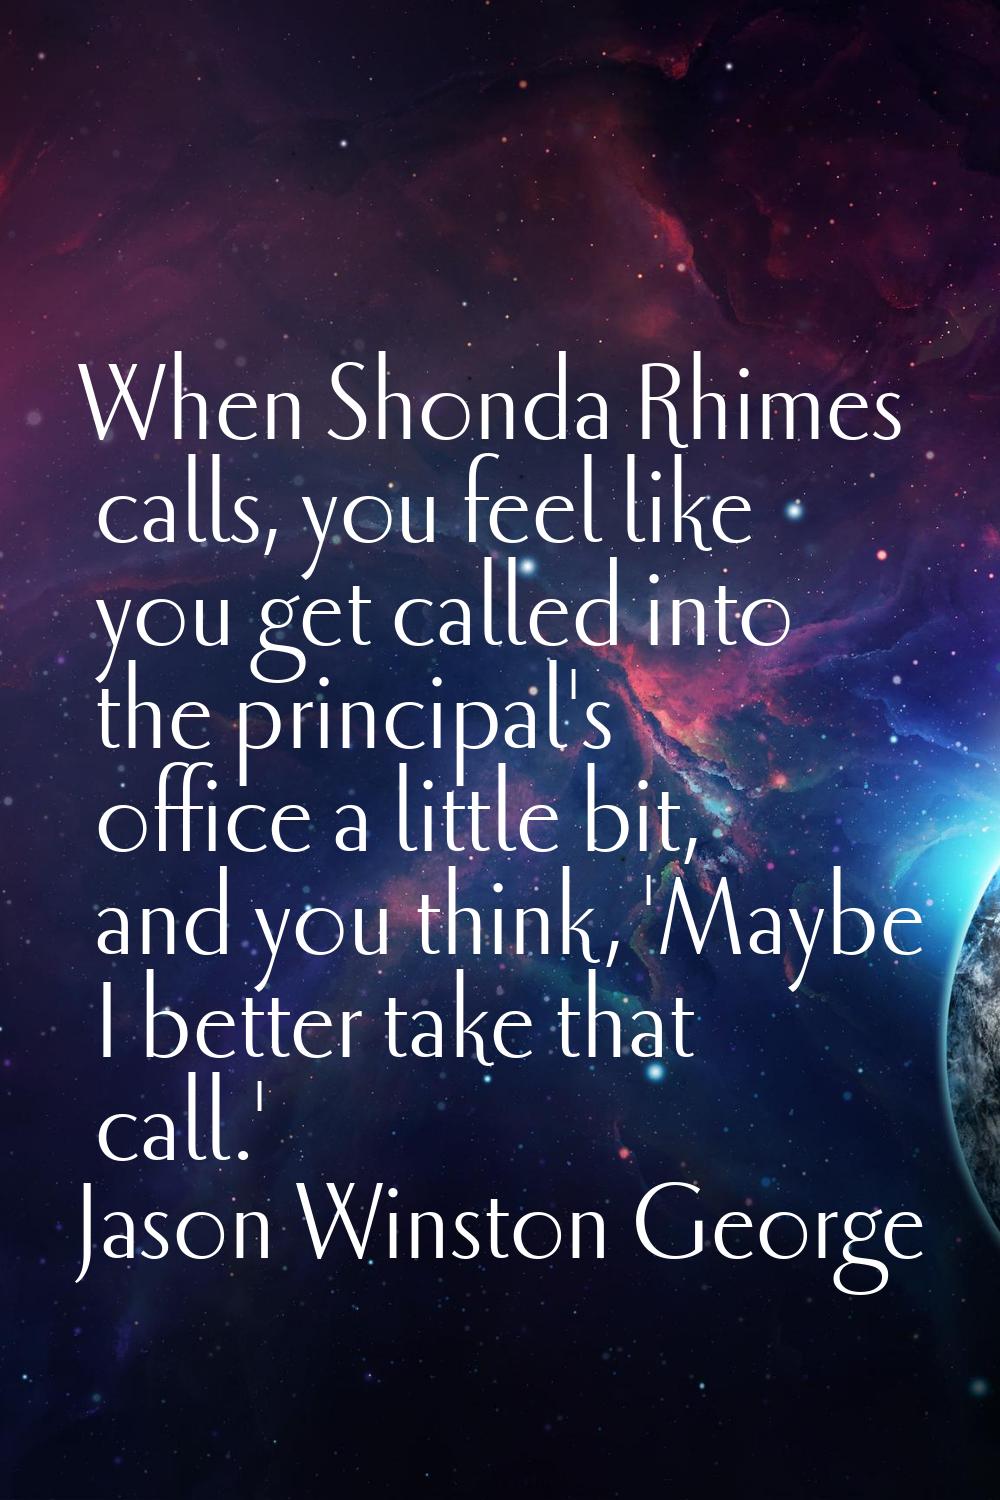 When Shonda Rhimes calls, you feel like you get called into the principal's office a little bit, an